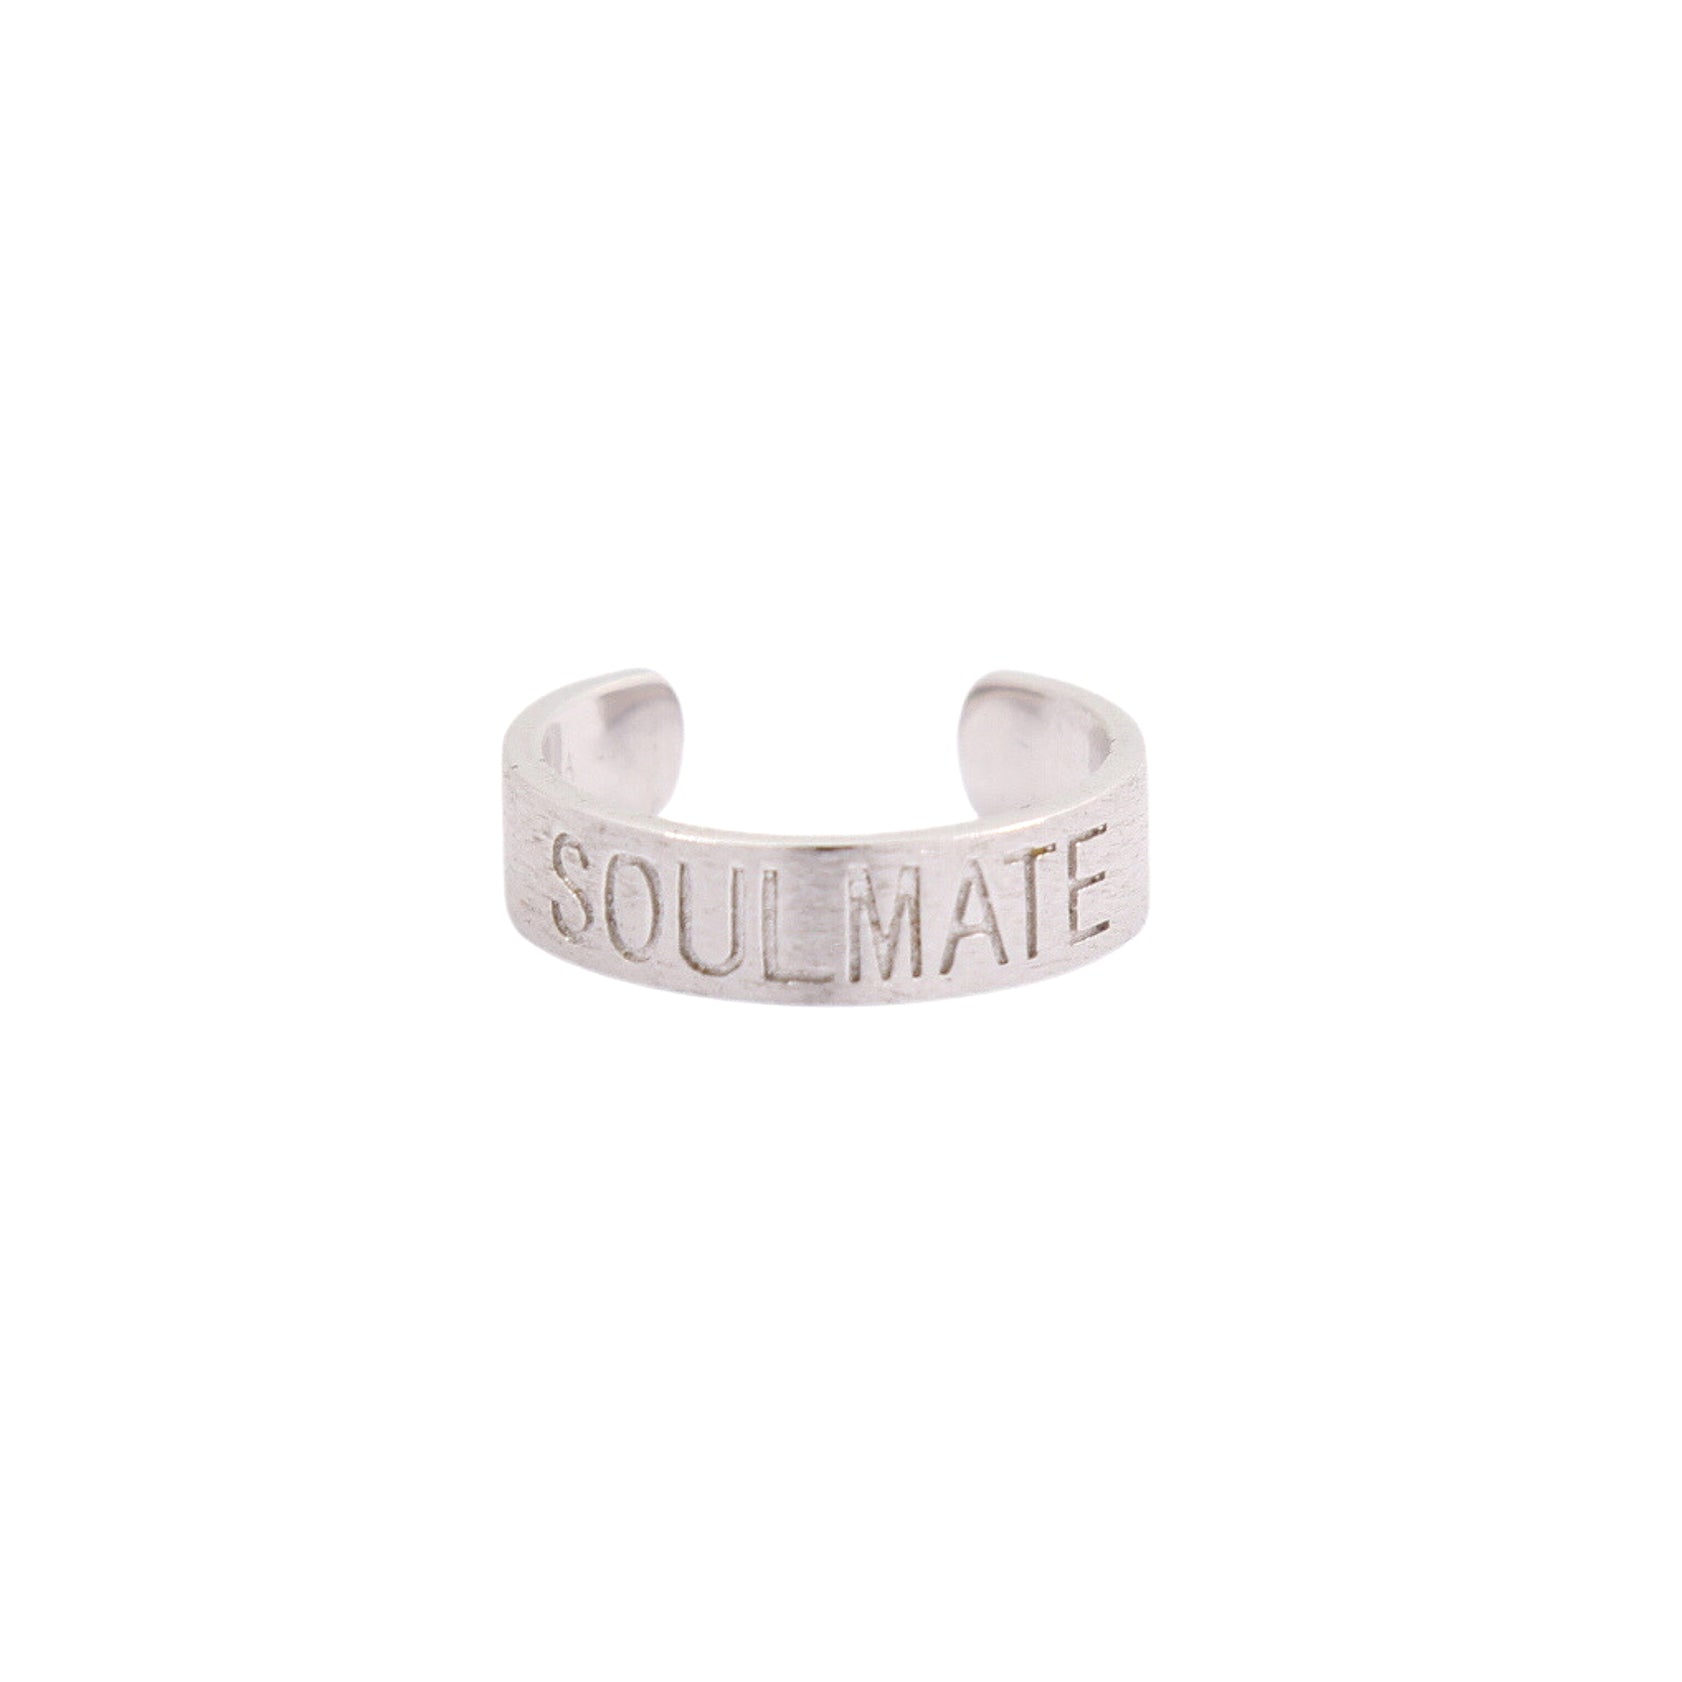 Find Your Perfect Match: Soulmate Silver Toe Ring